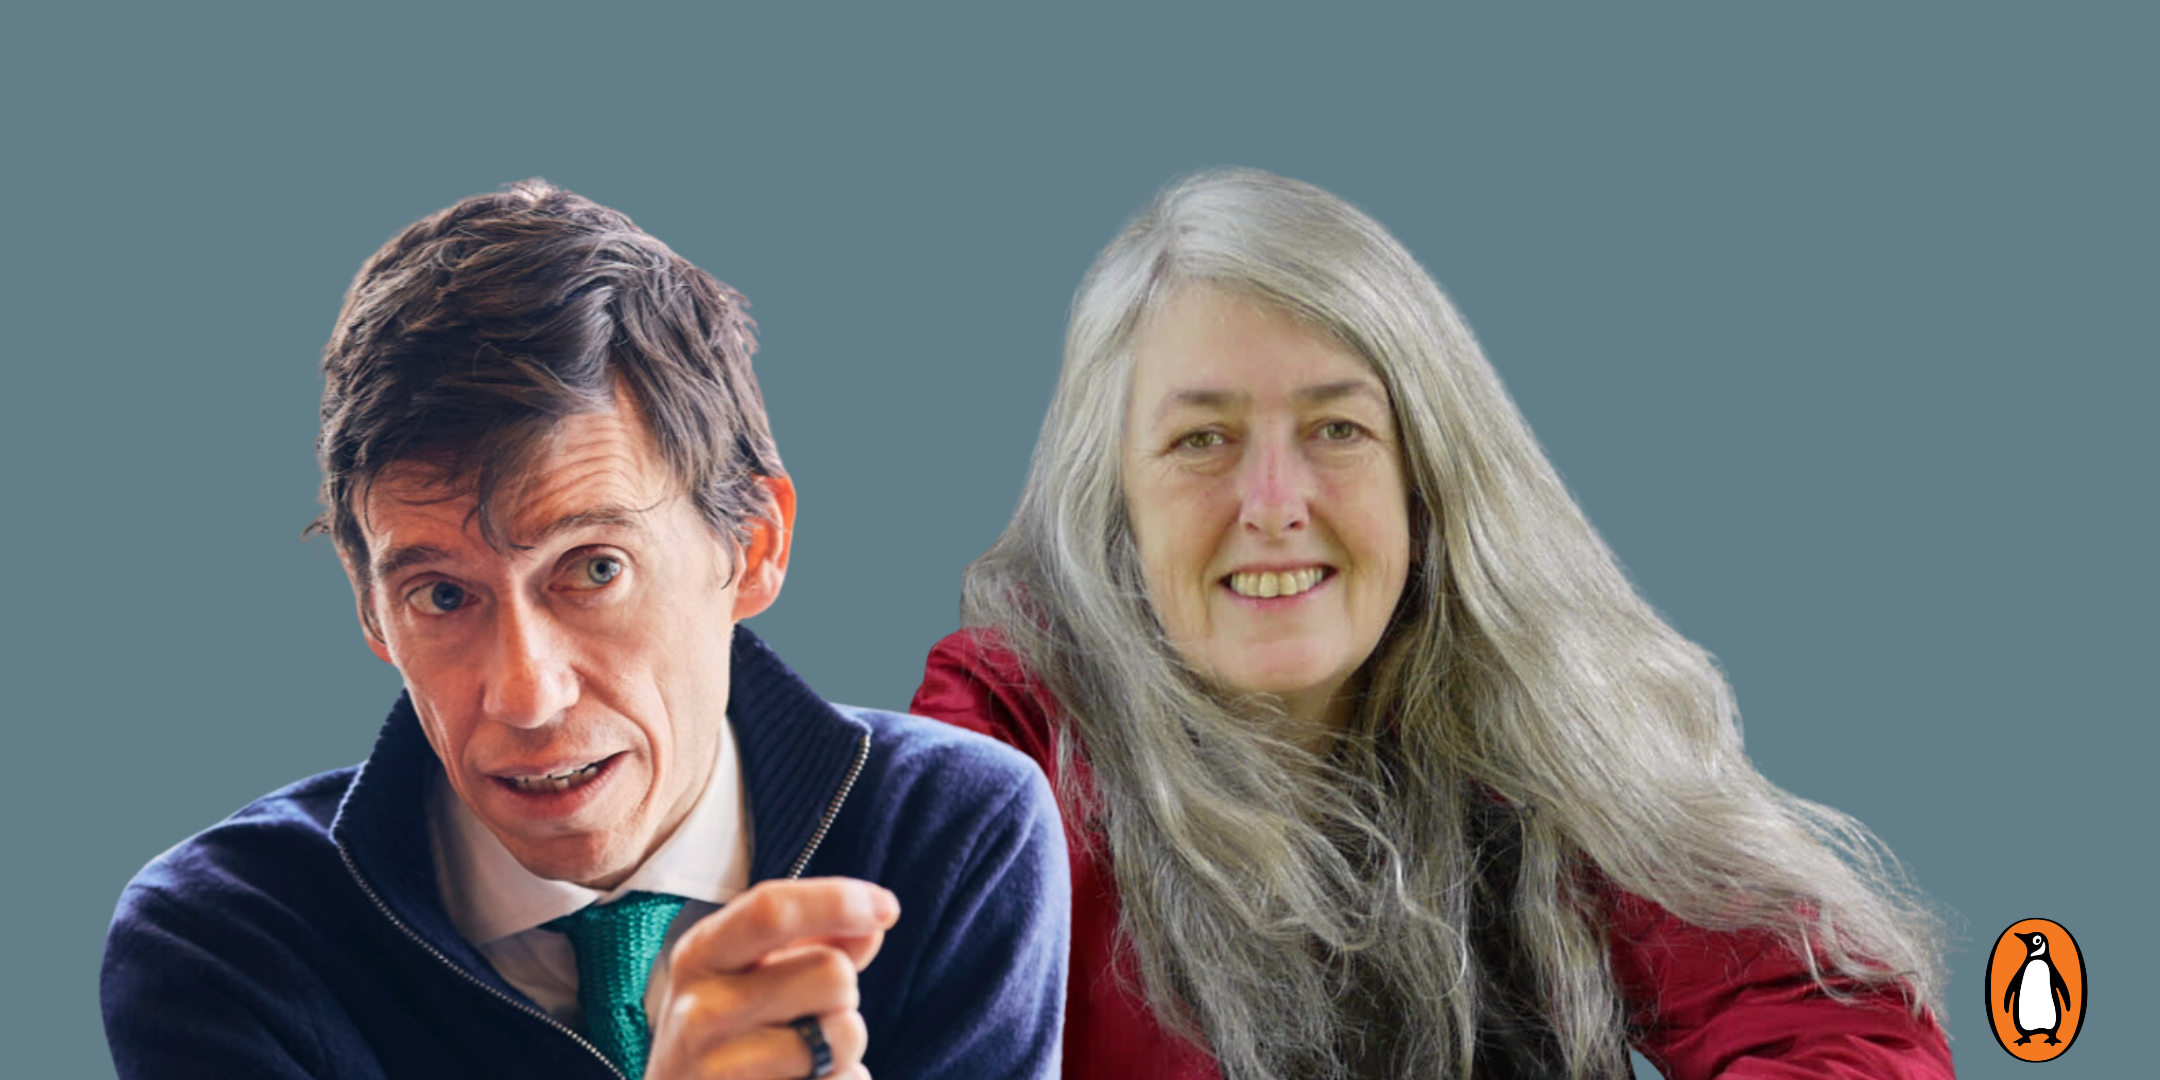 Mary Beard and Rory Stewart on Politics and Power - Intelligence Squared